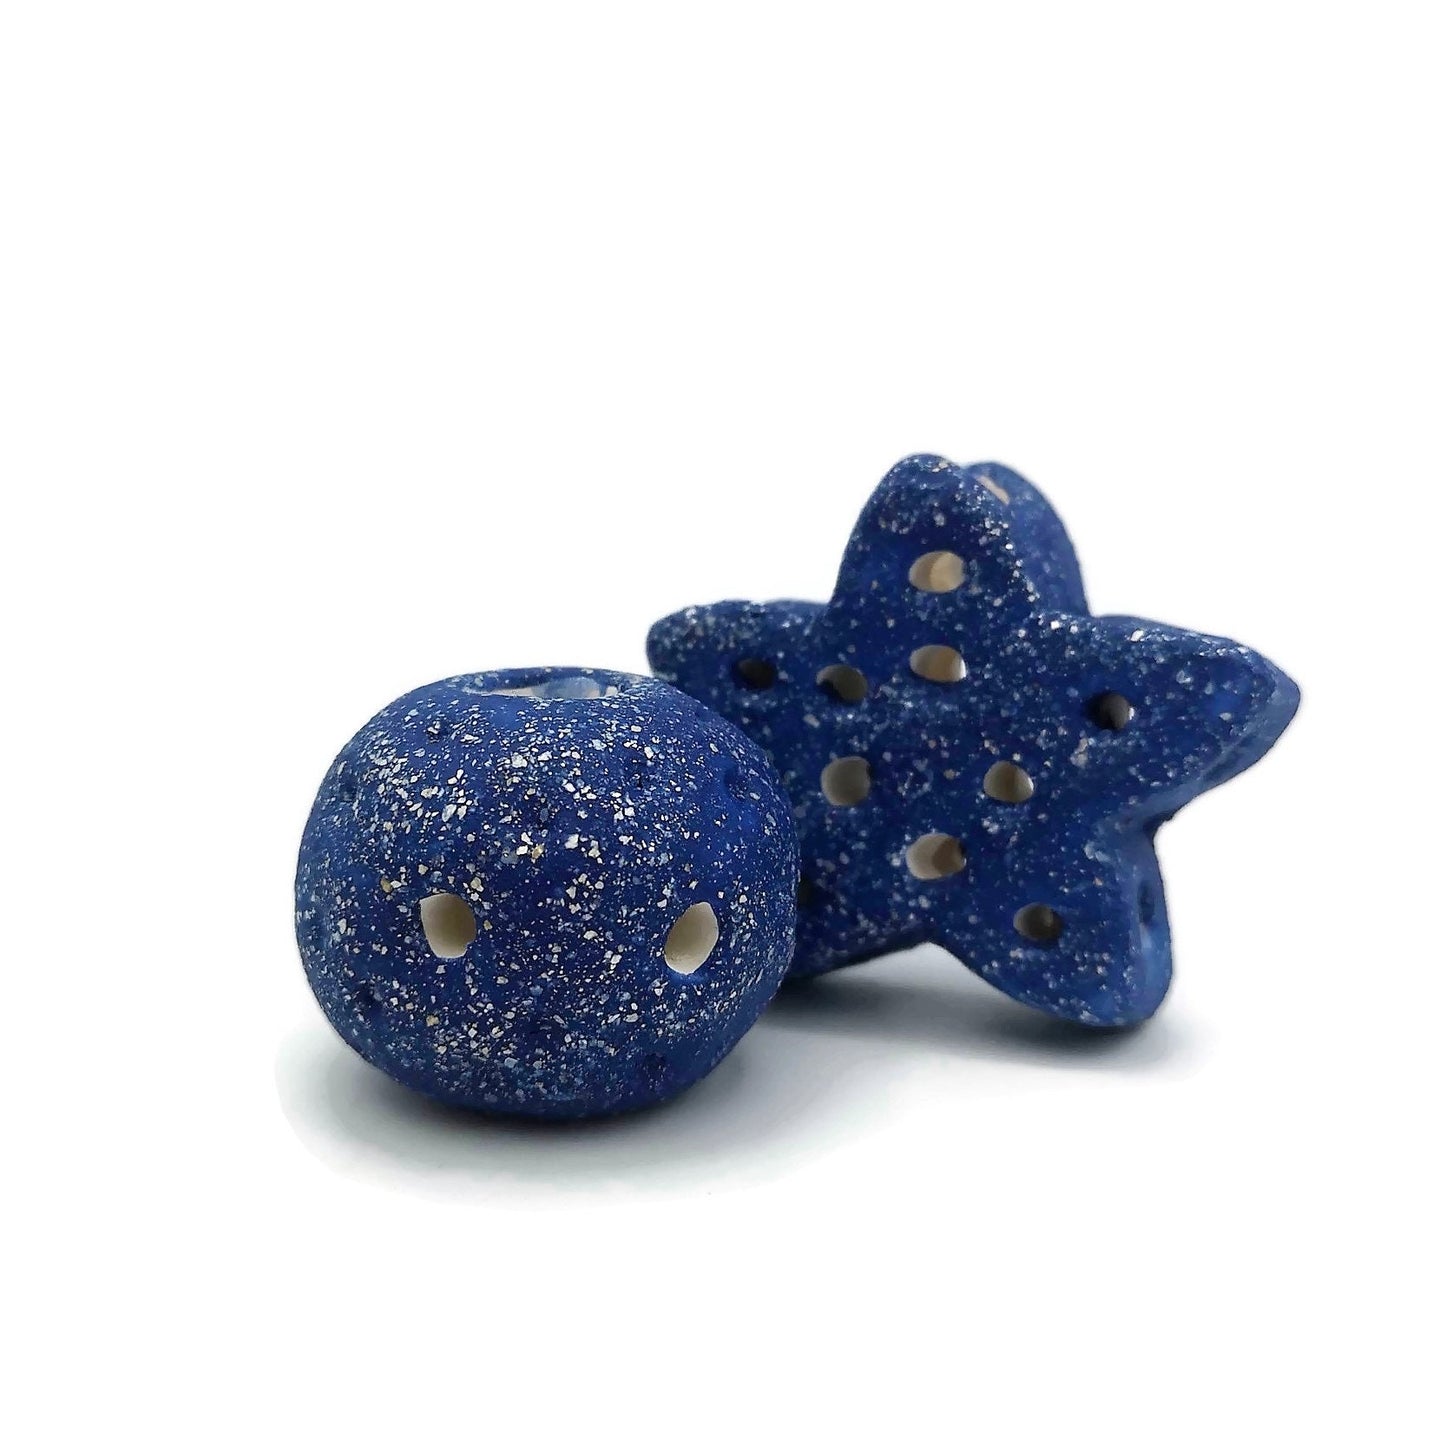 Extra Large Ceramic Beads, Giant Macrame Beads, Round Ball And Star Ornaments, Large Hole Beads Handmade, Sparkly Blue Focal Point Beads - Ceramica Ana Rafael